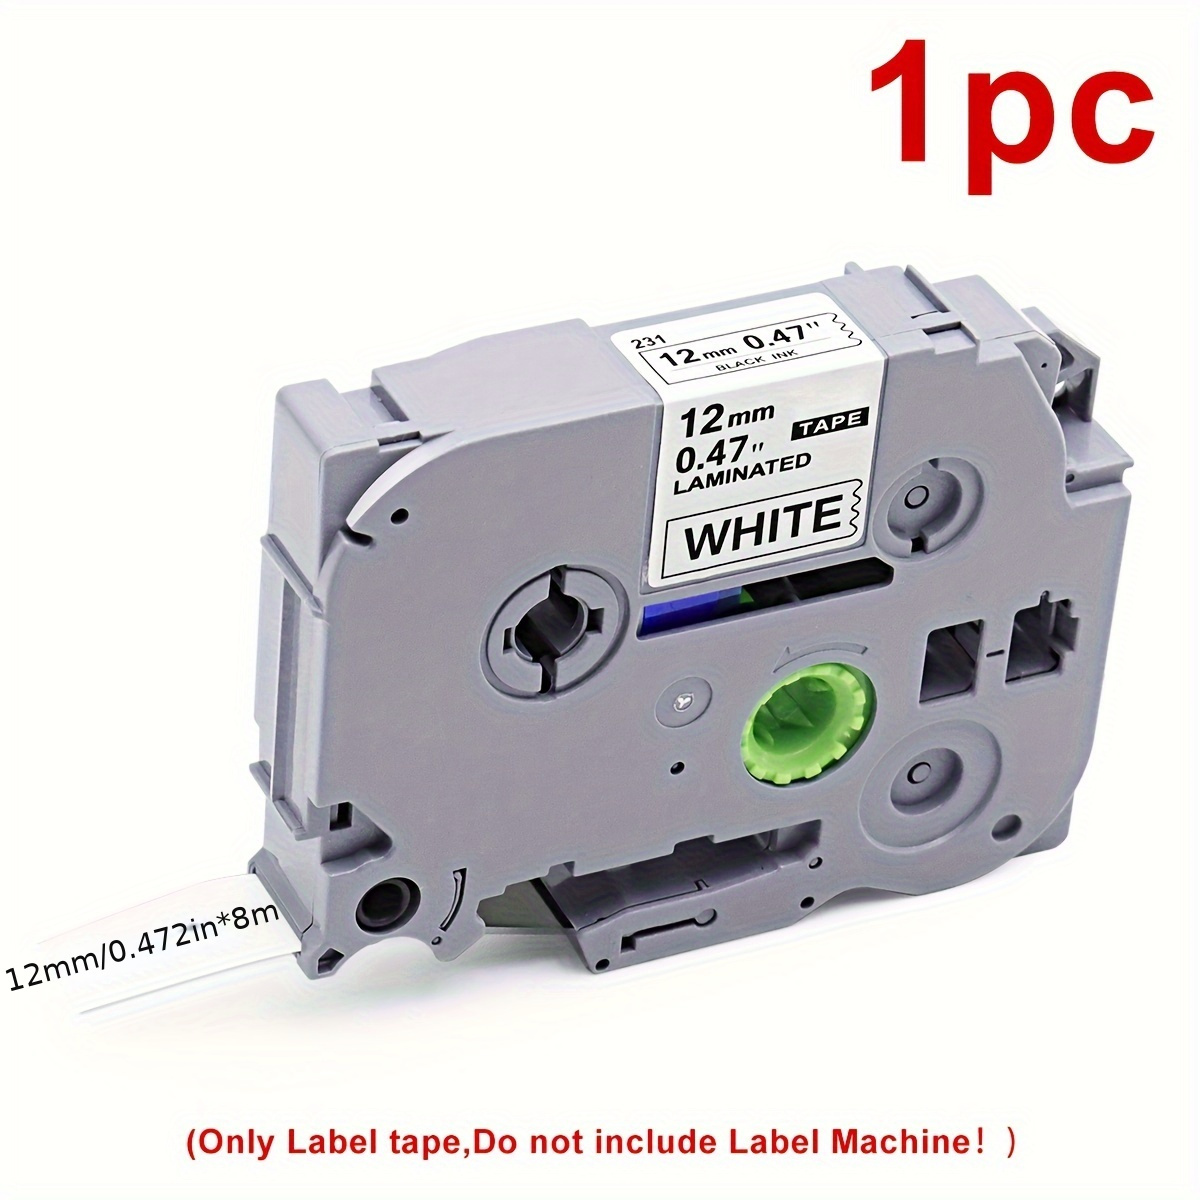 

1pc Tz/tze Tape Replacement With Tape 12mm 0.47 Laminated White For Brother P-touch Label Tape Tze-231 With Label Maker Pt-h103w H110 D210 D220 D400 1180 1280 1890 2040 8m 26.2ft